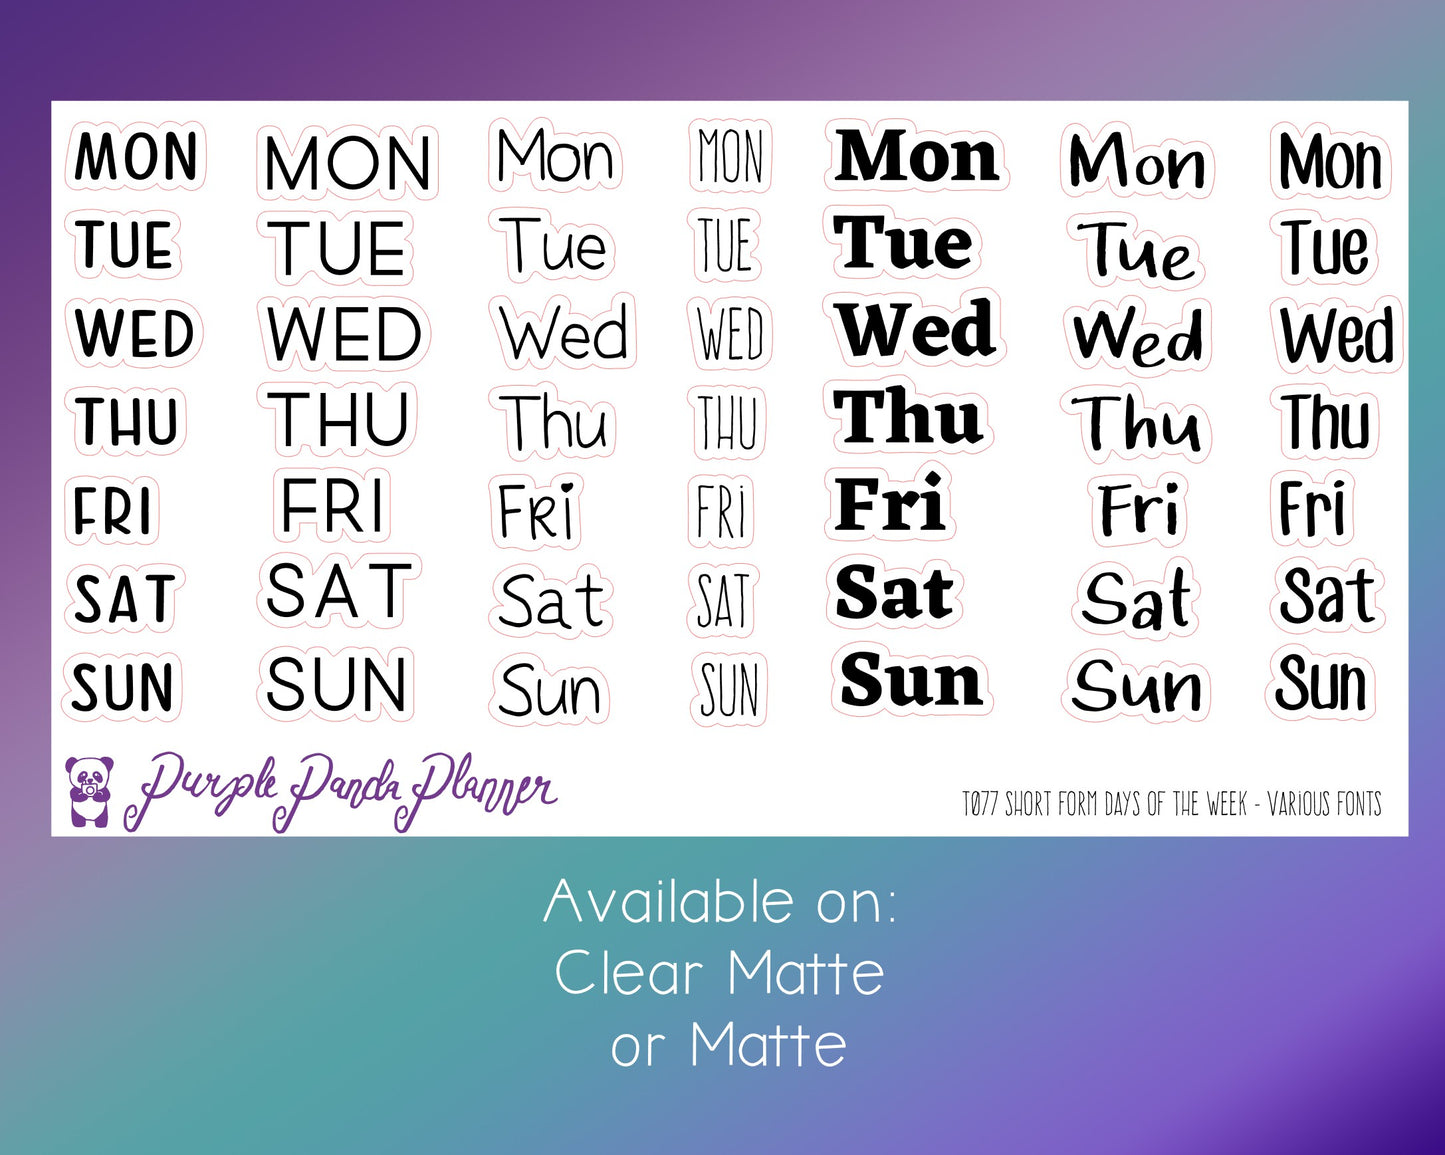 Short Form Days of the Week (T077) - Various Fonts - Black